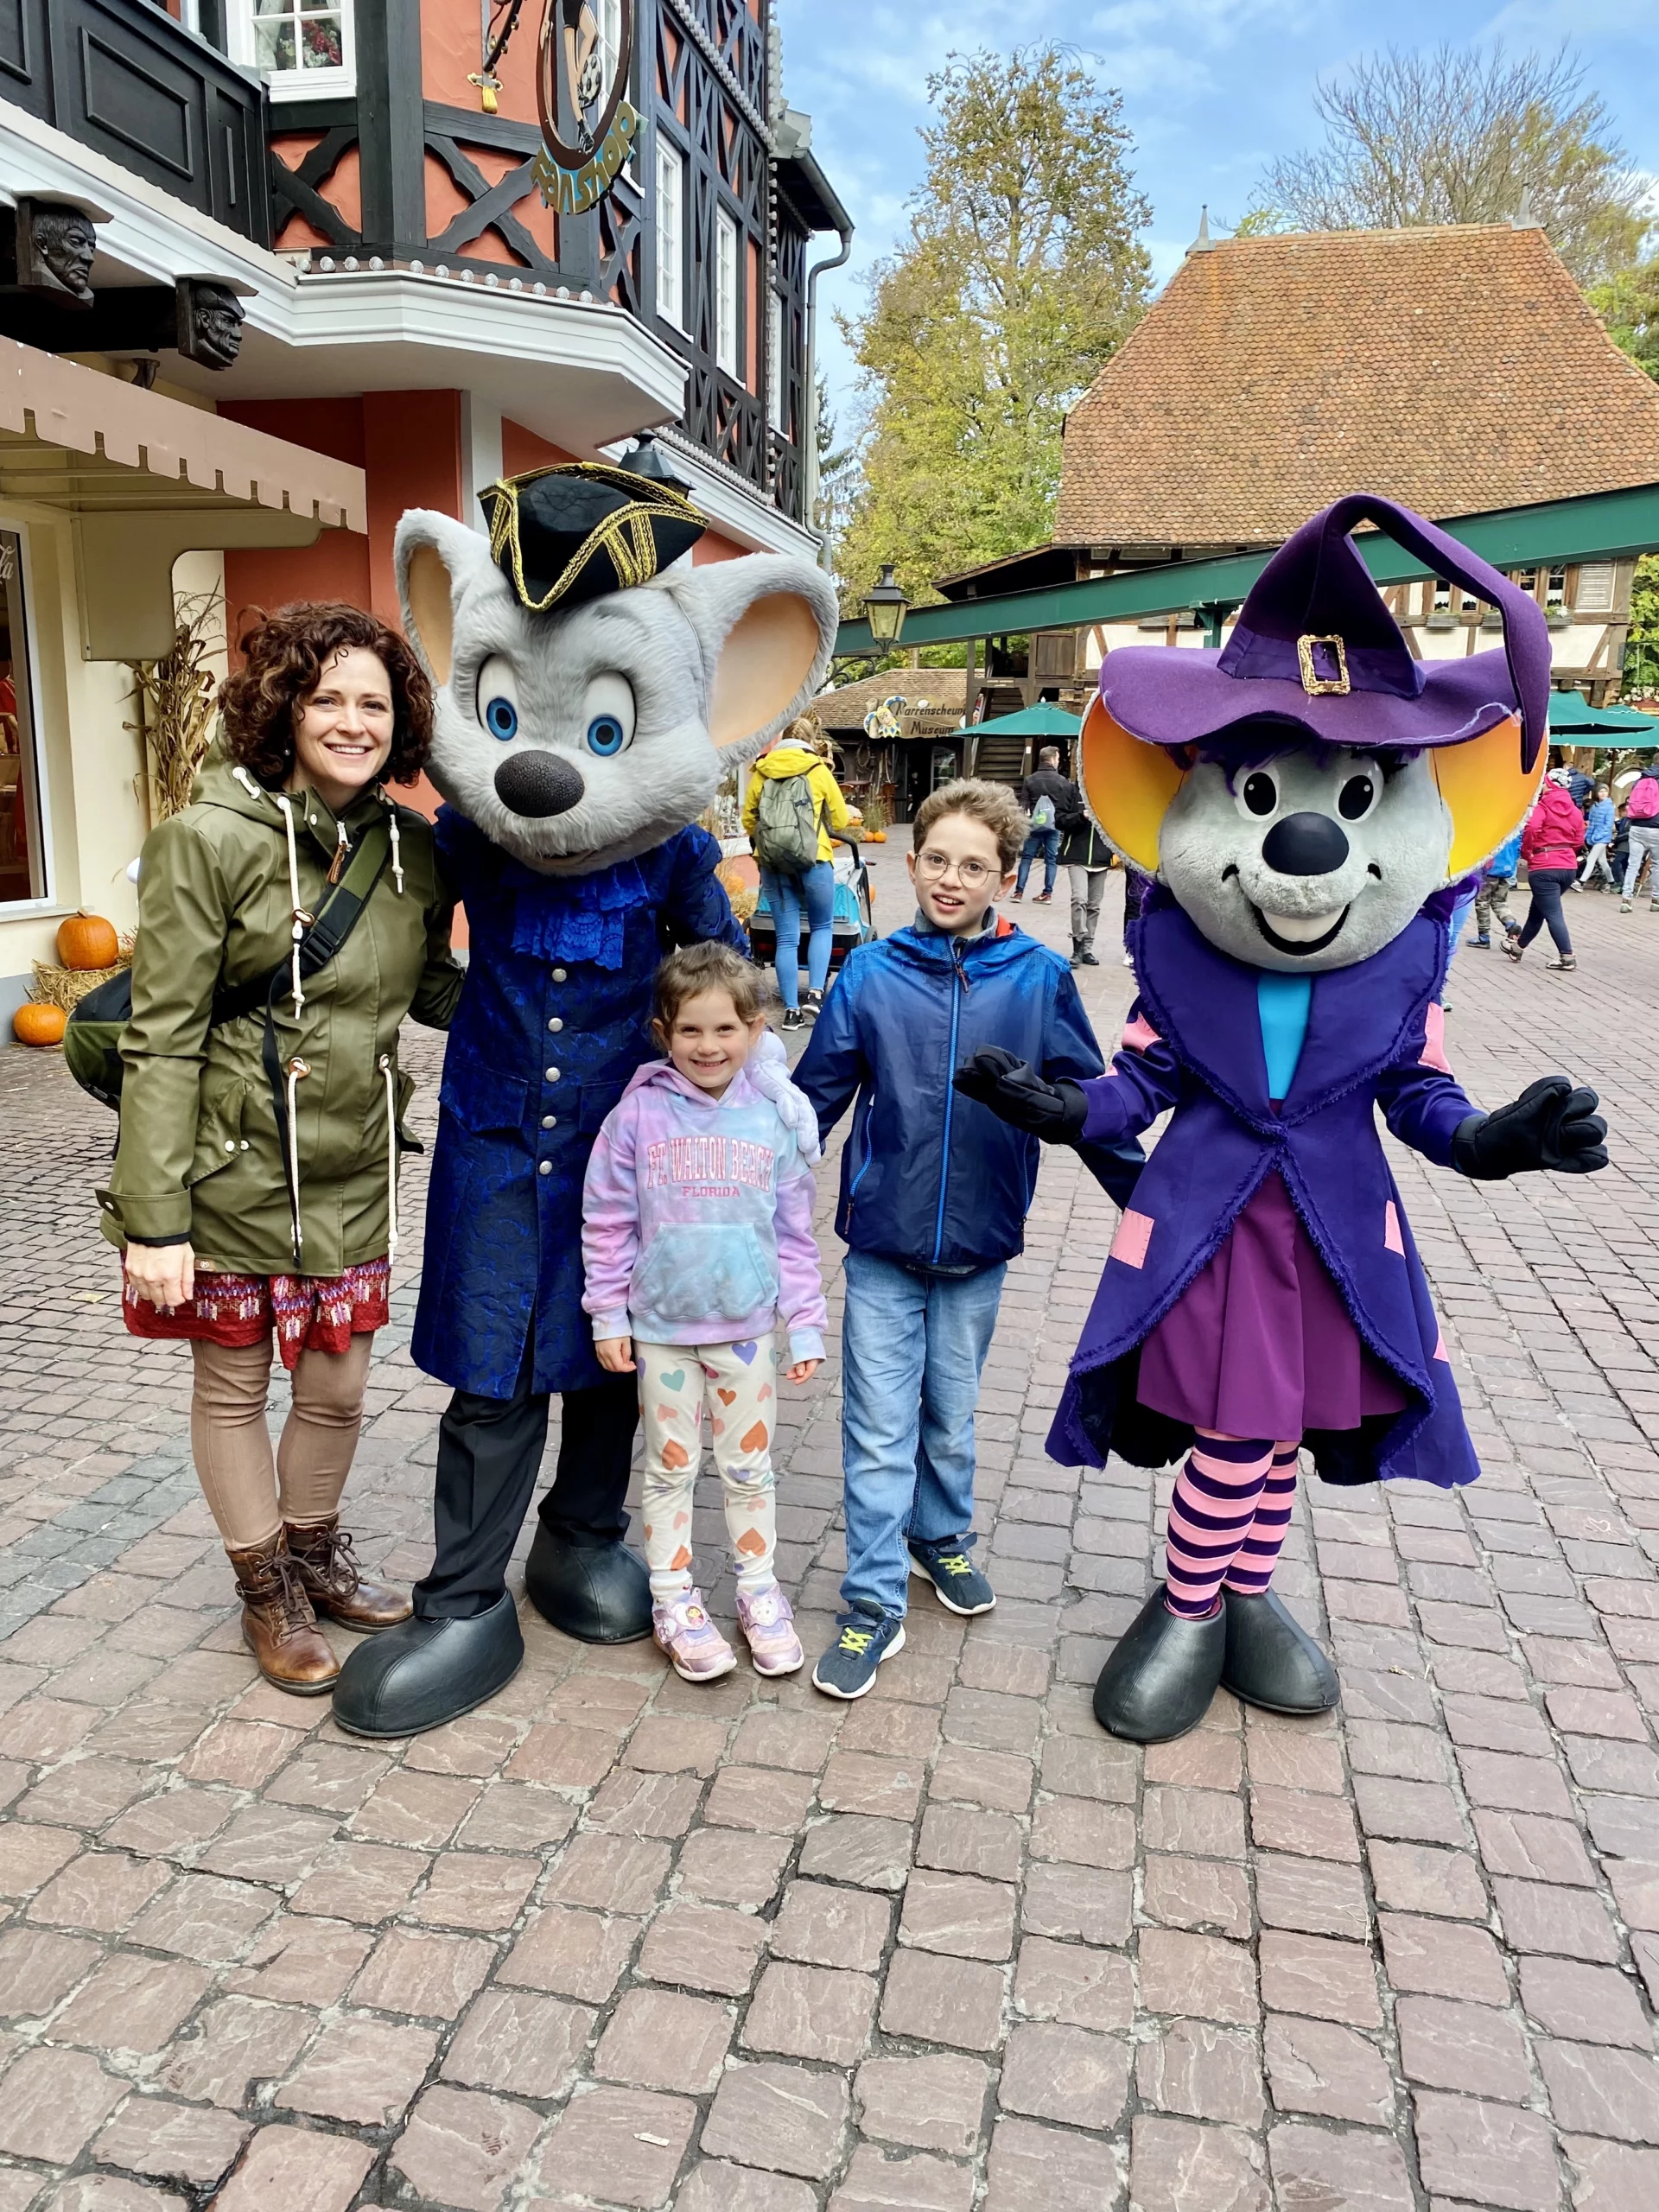 Europa Park vs. Disney World - here we are visiting the largest amusement park in all of Germany, Europa Park!